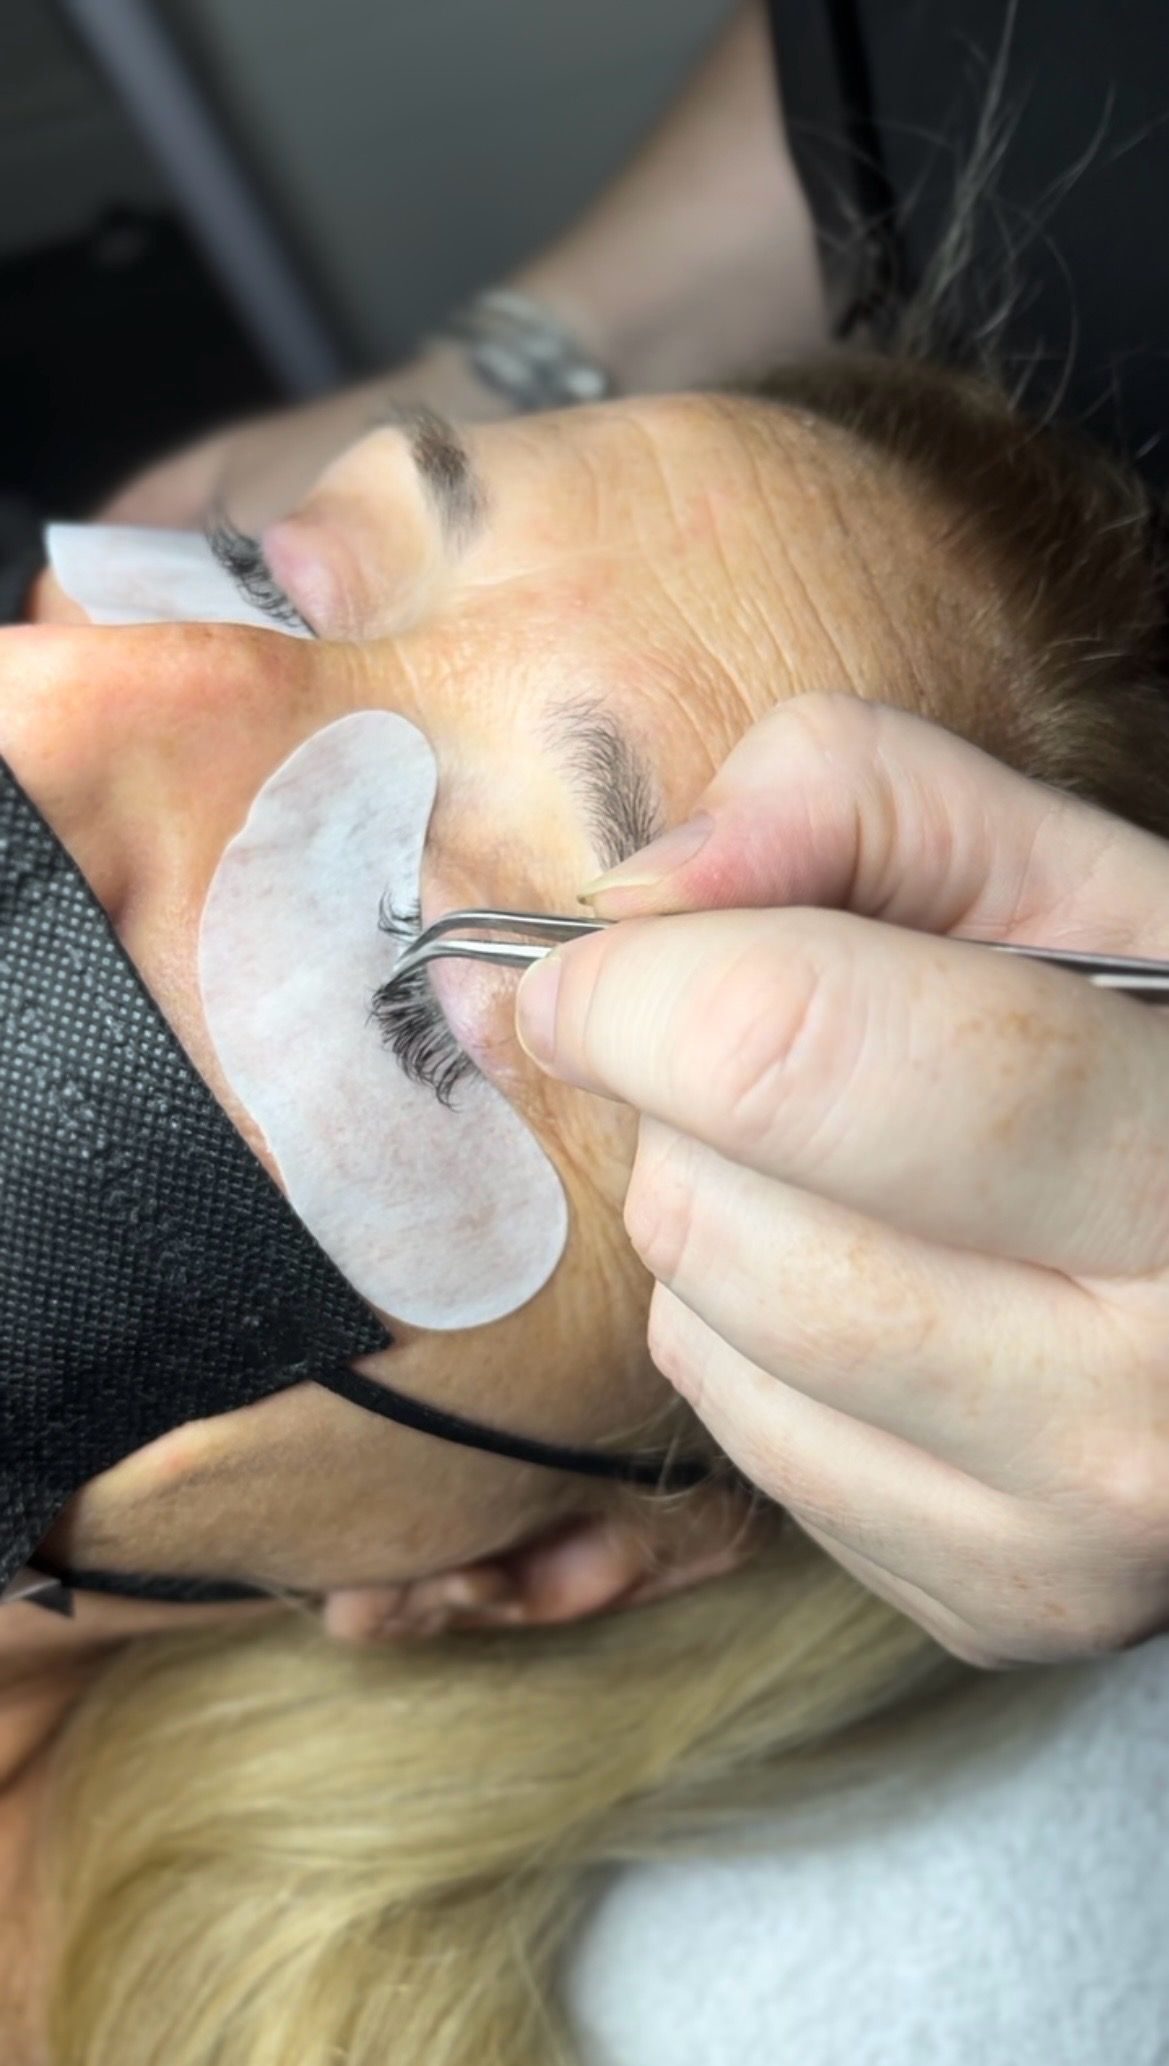 A woman is getting her eyelashes done at a salon.